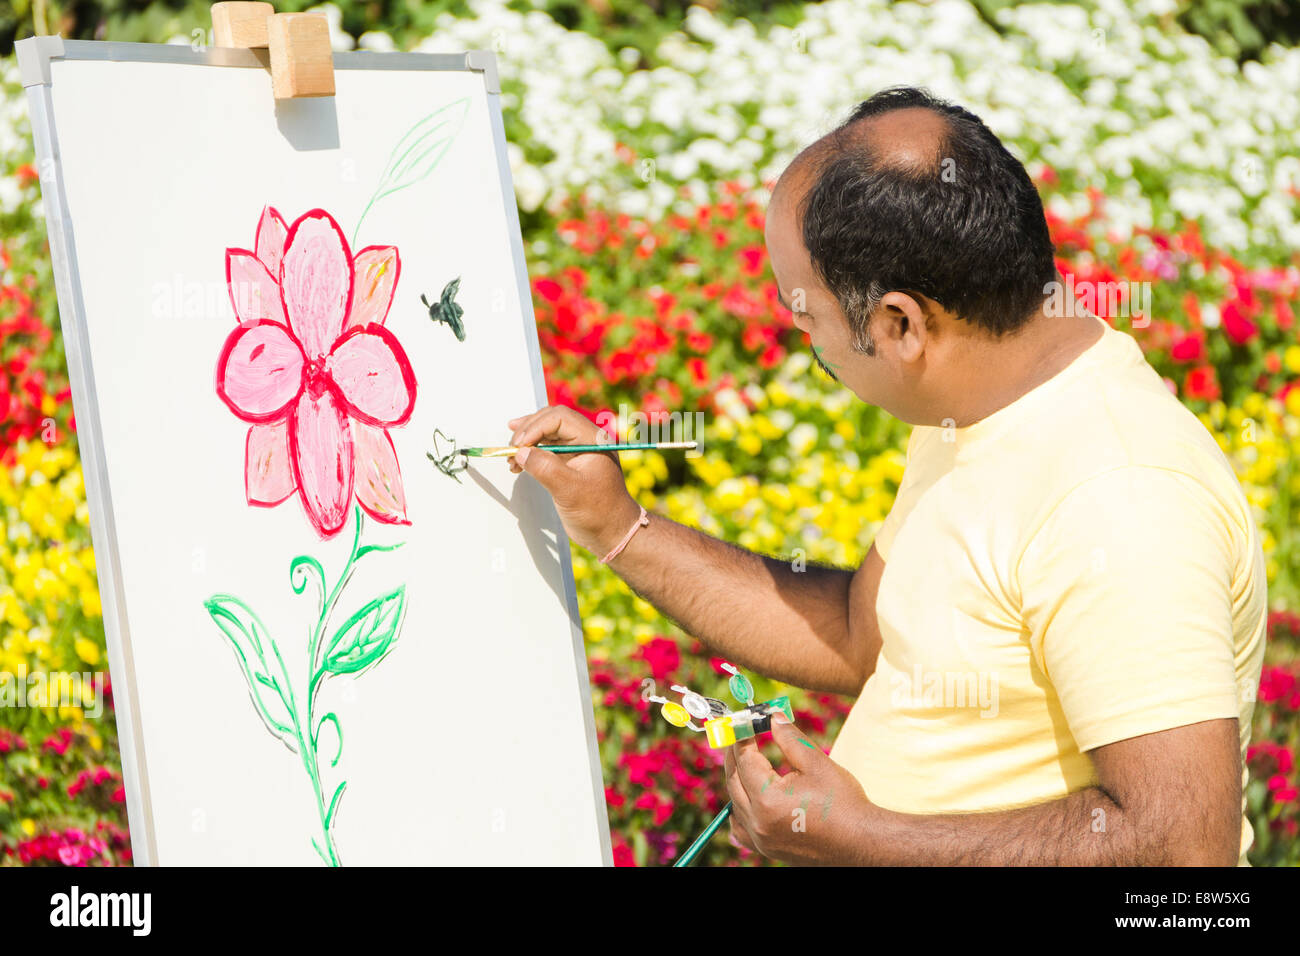 1 Indian man Painting at Canvas Stock Photo